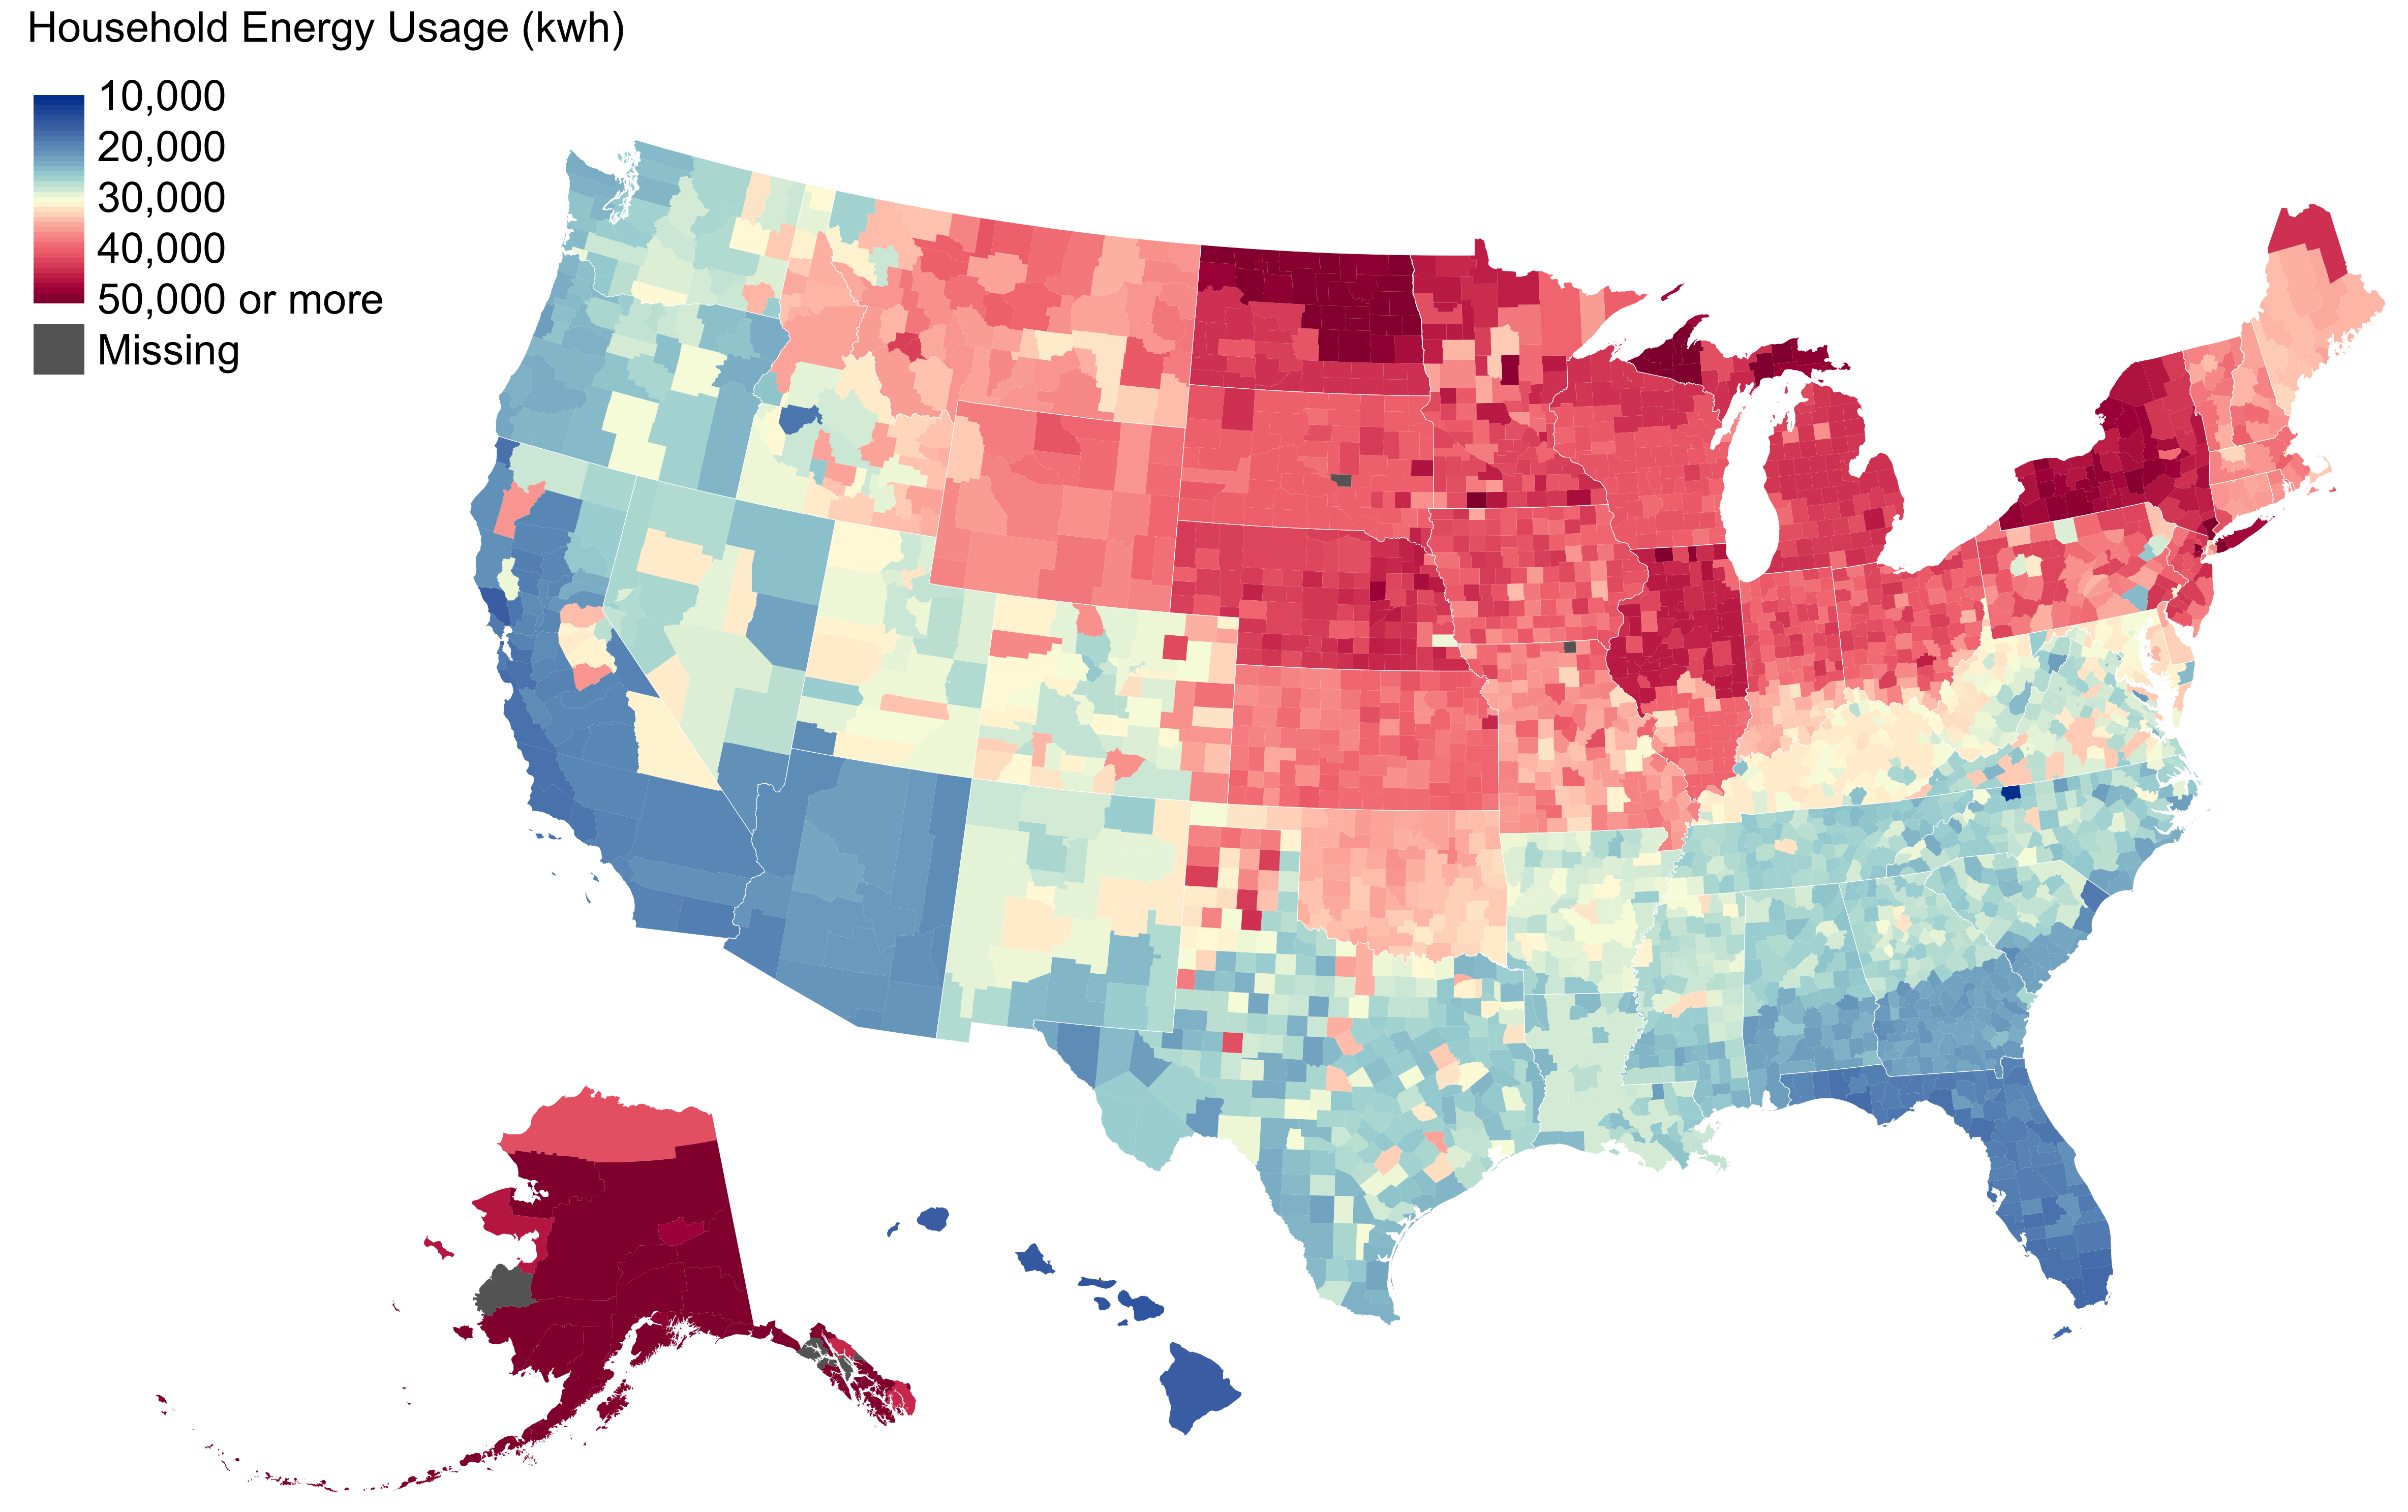 Median household energy usage by county